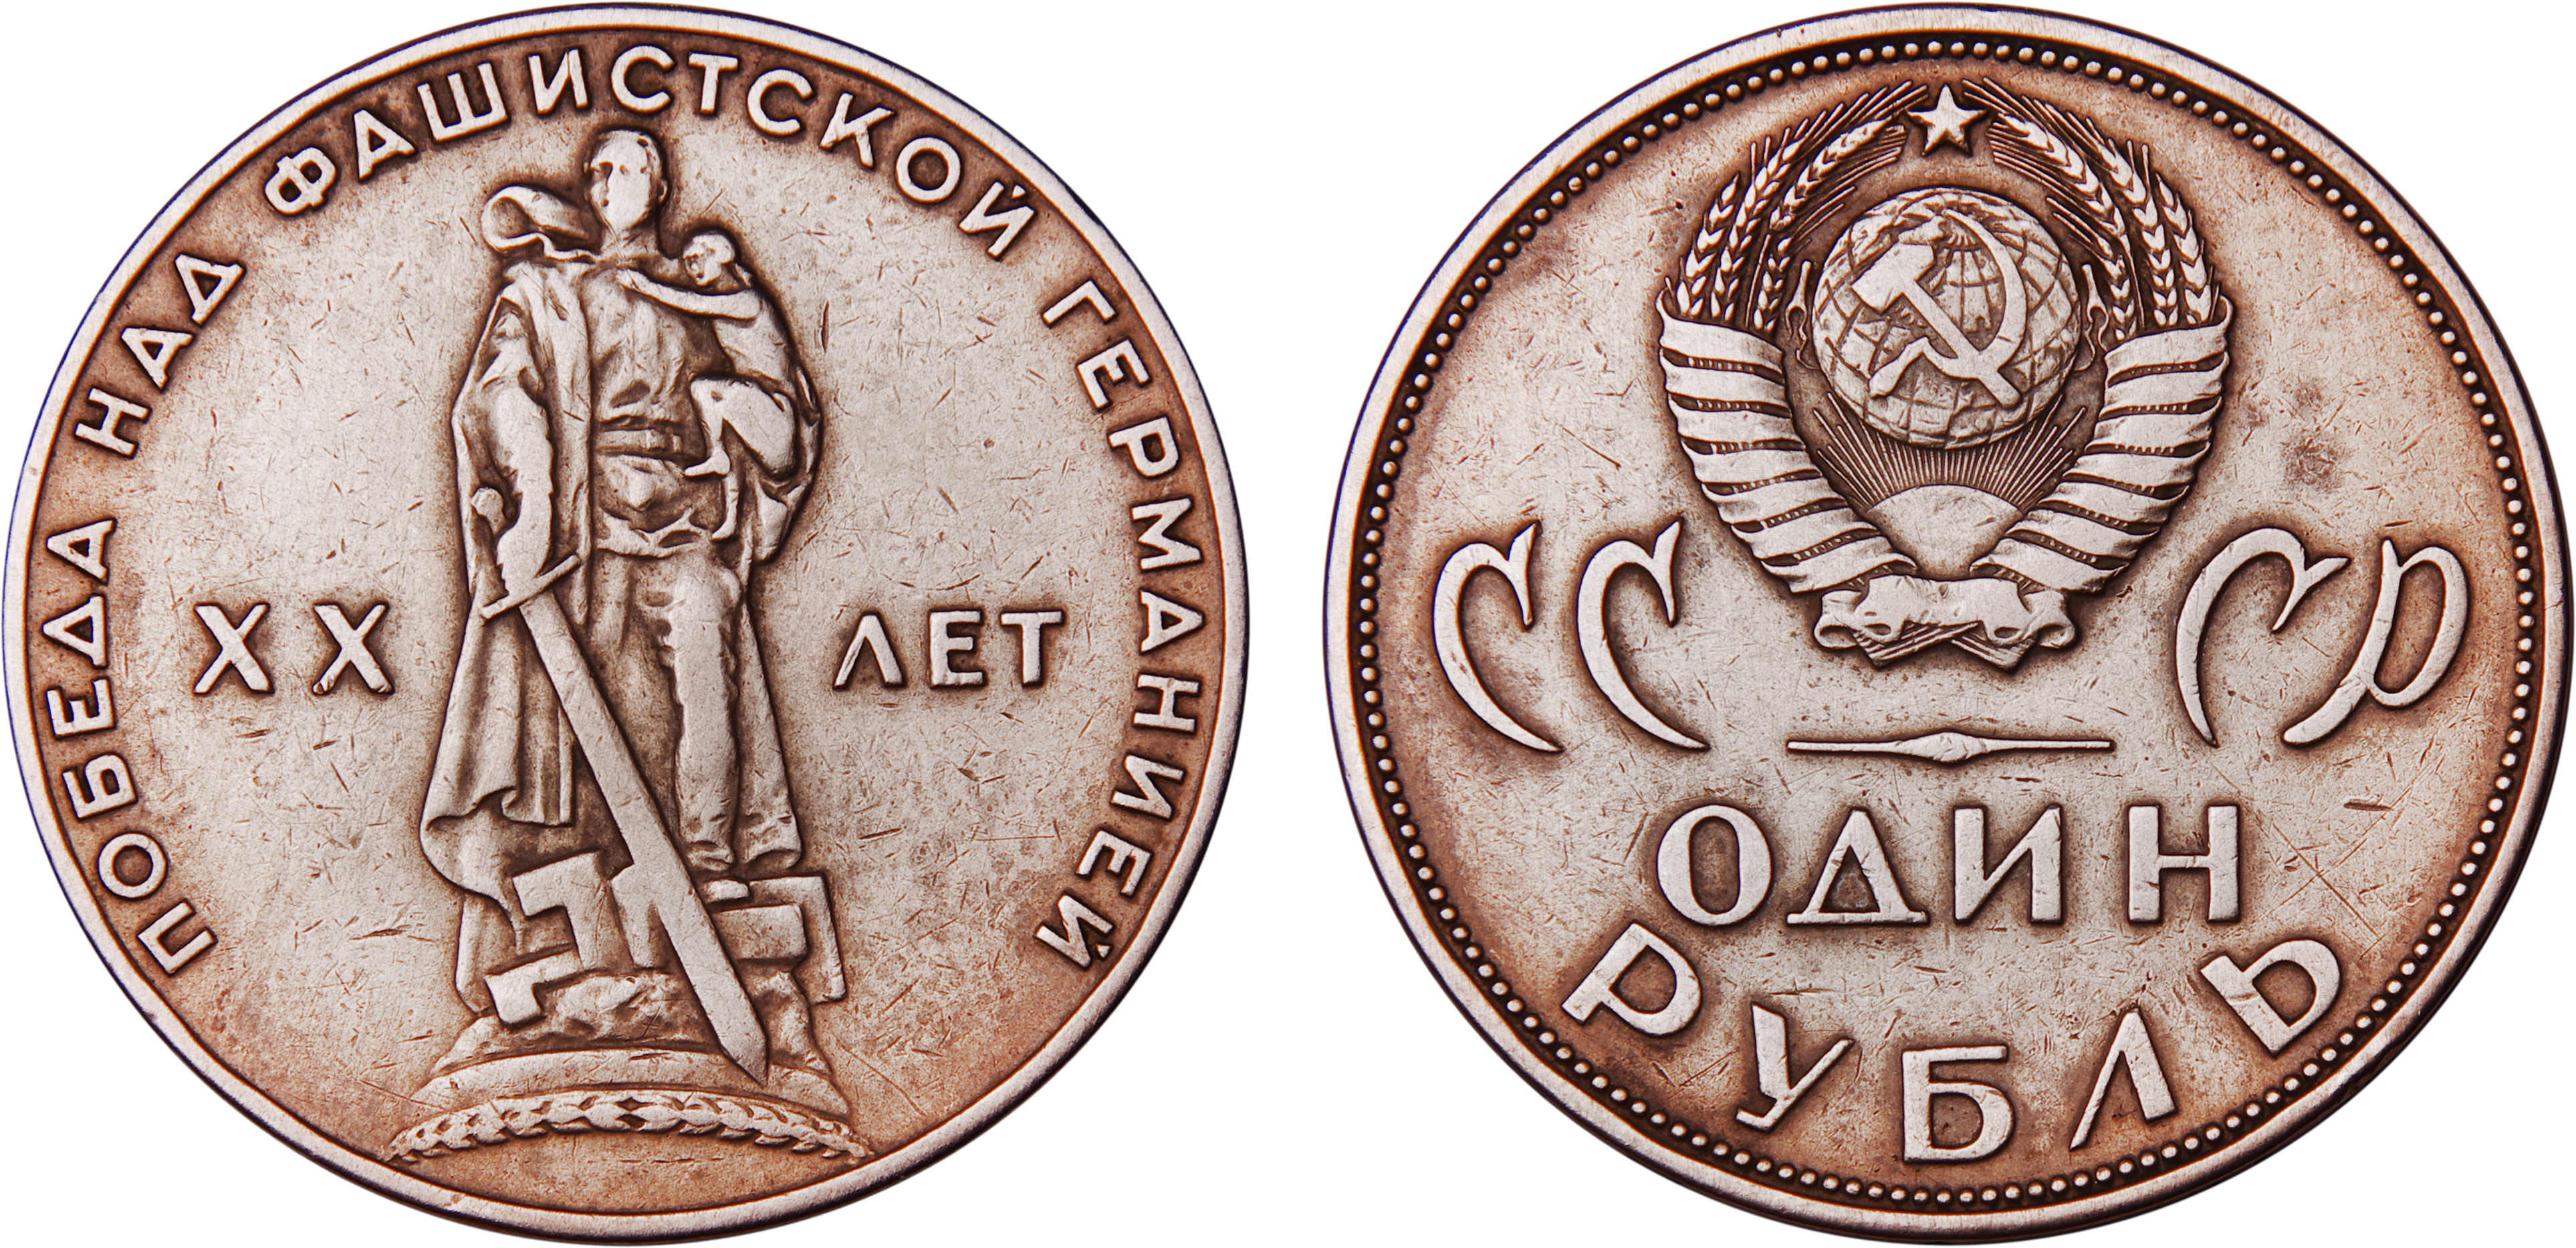 RARE USSR 1 RUBLE 1965 RUSSIAN SOVIET COIN 20 YEARS VICTORY PATRIOTIC WAR *A2 